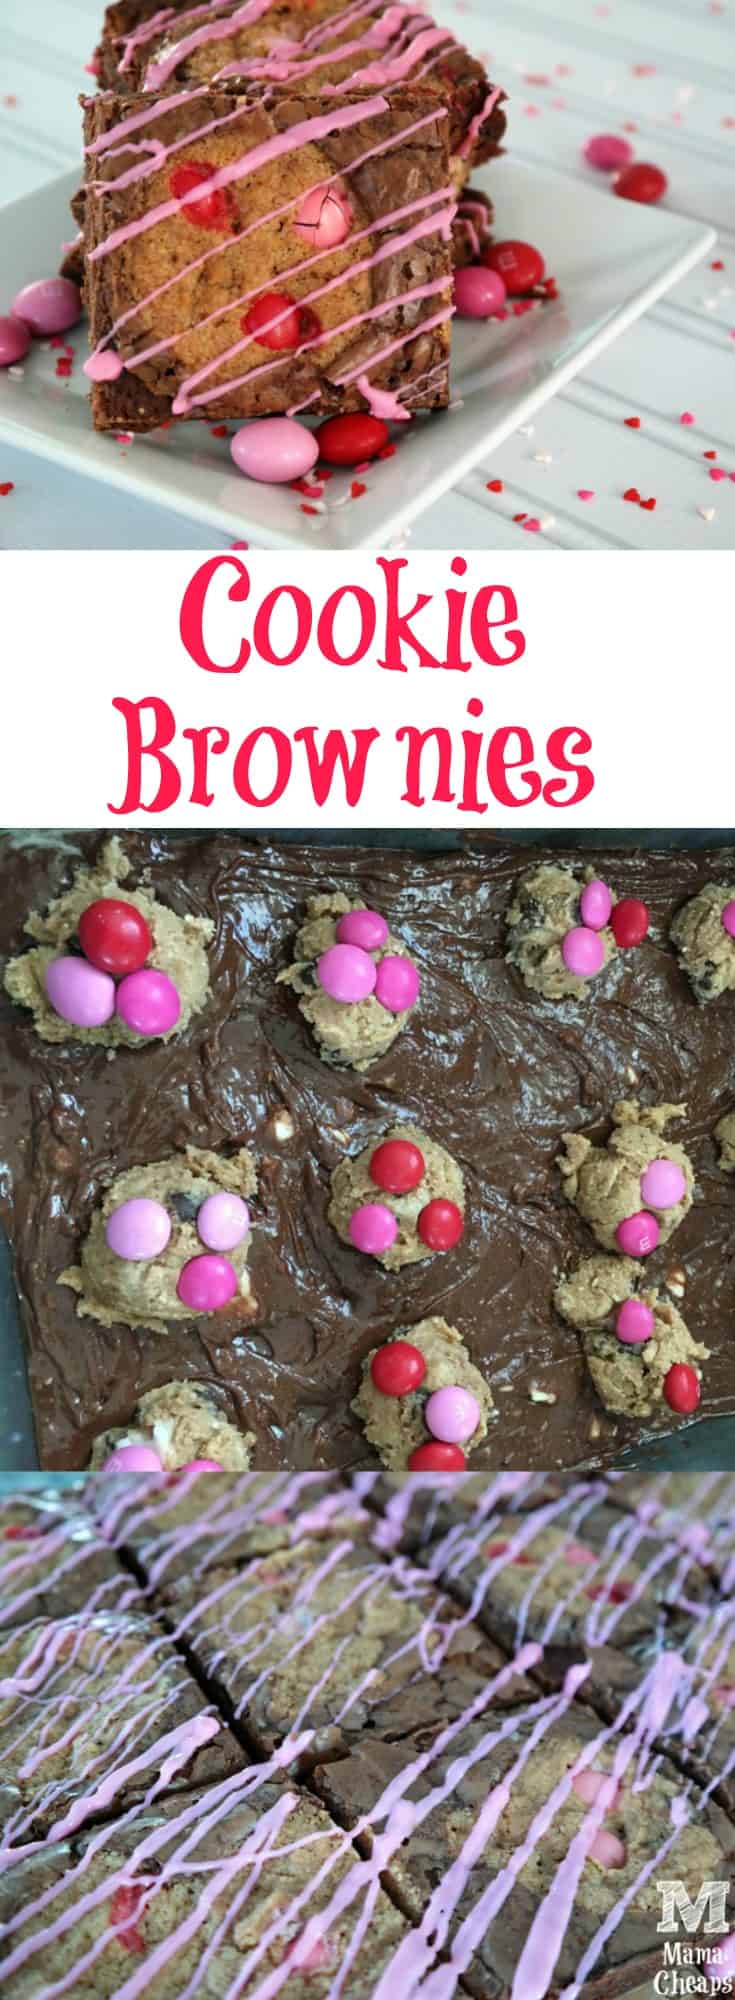 Cookie Brownies with M&Ms